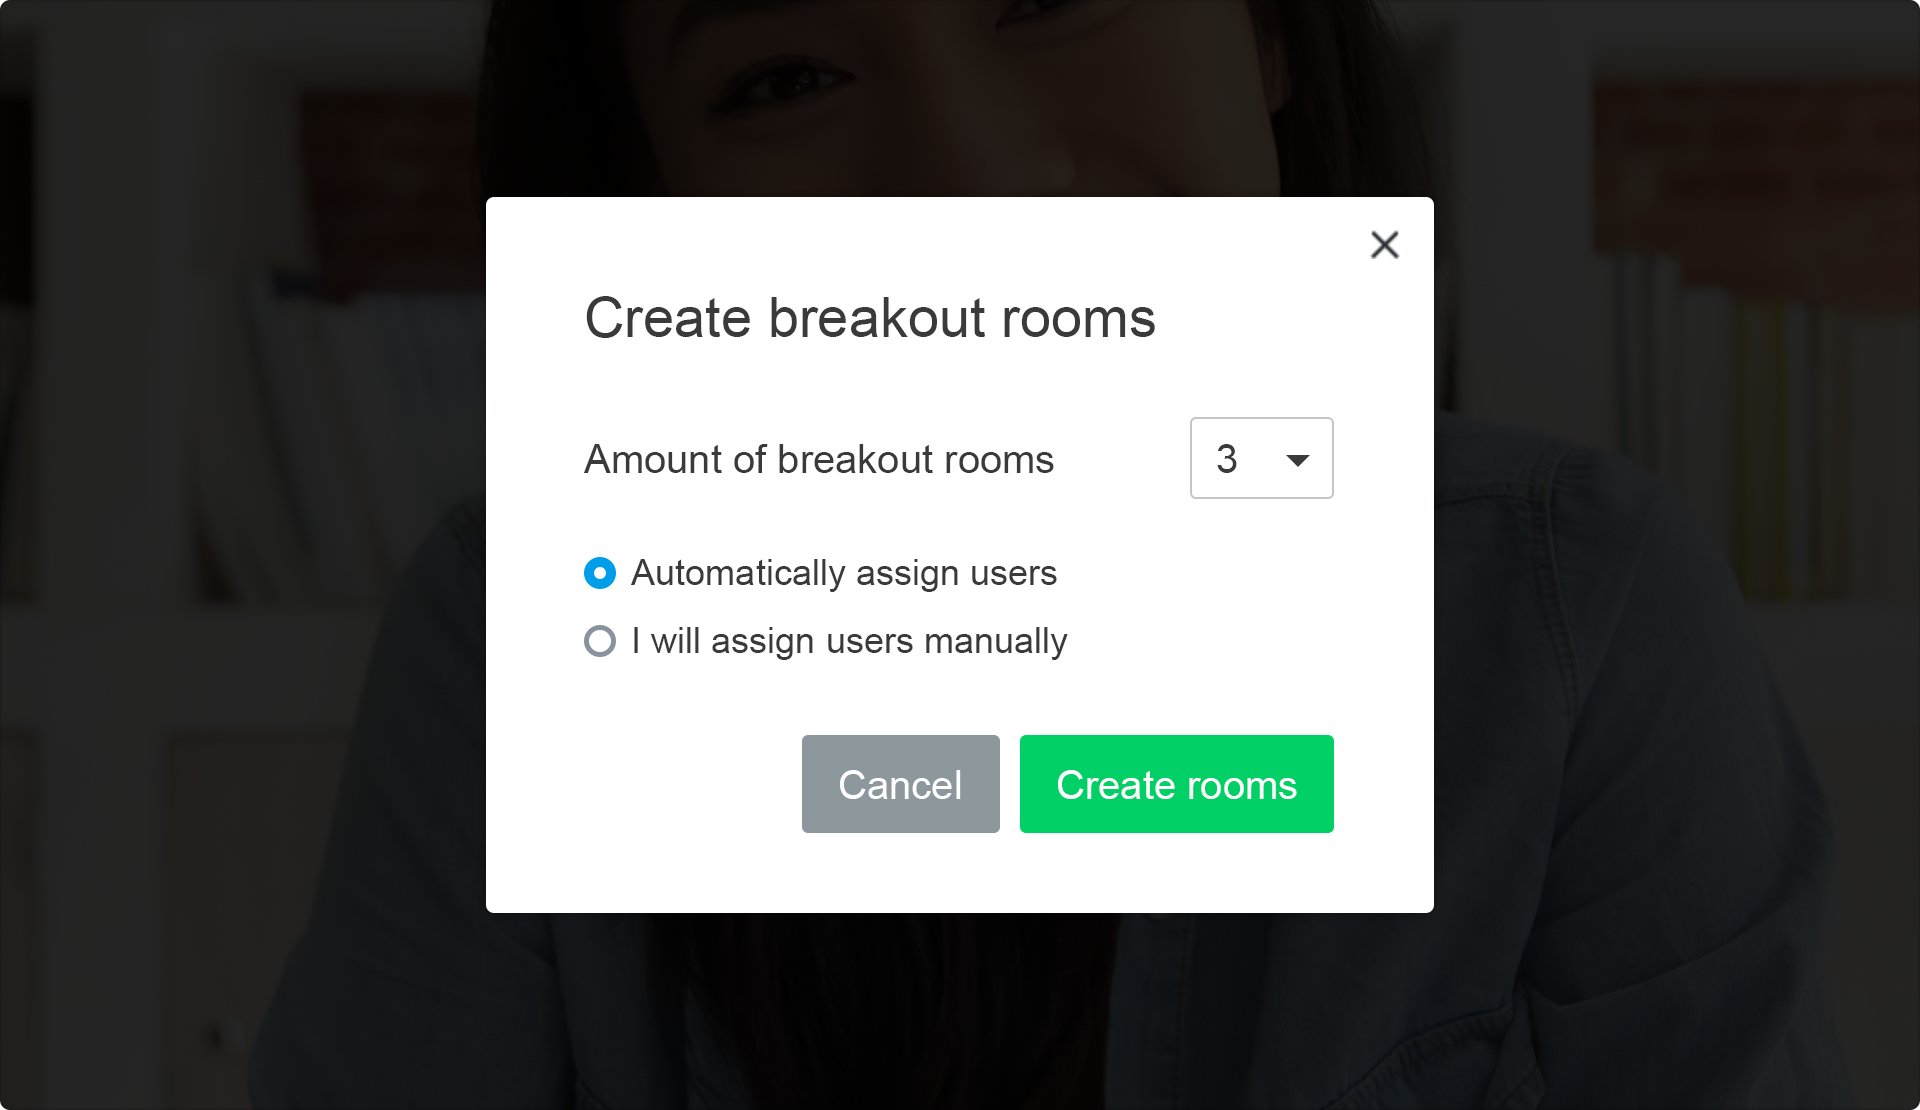 2. Create breakout rooms